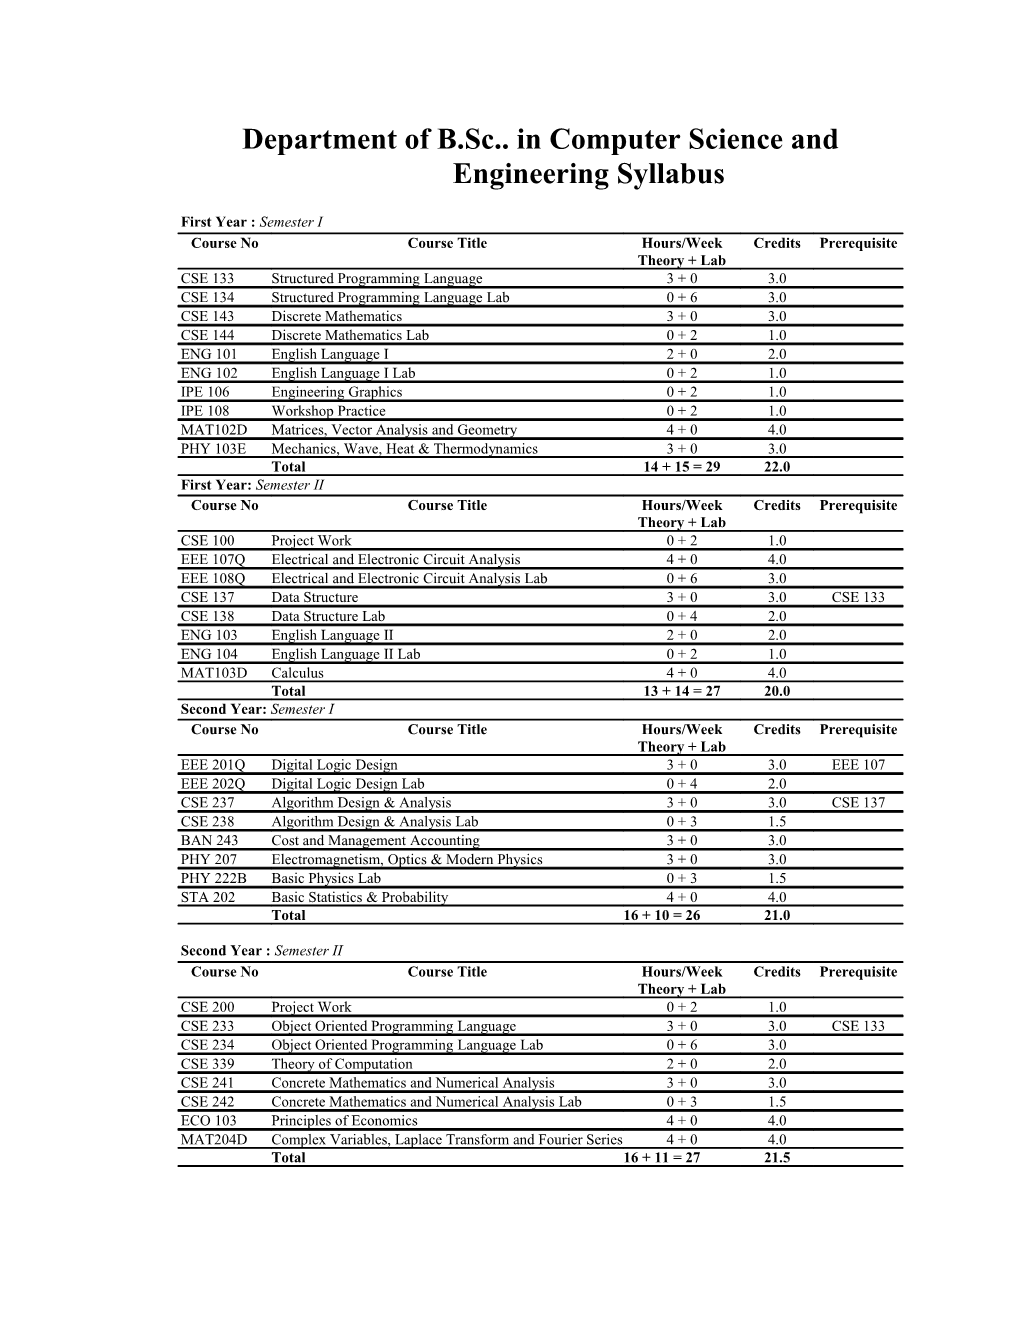 Department of Computer Science and Engineering Syllabus